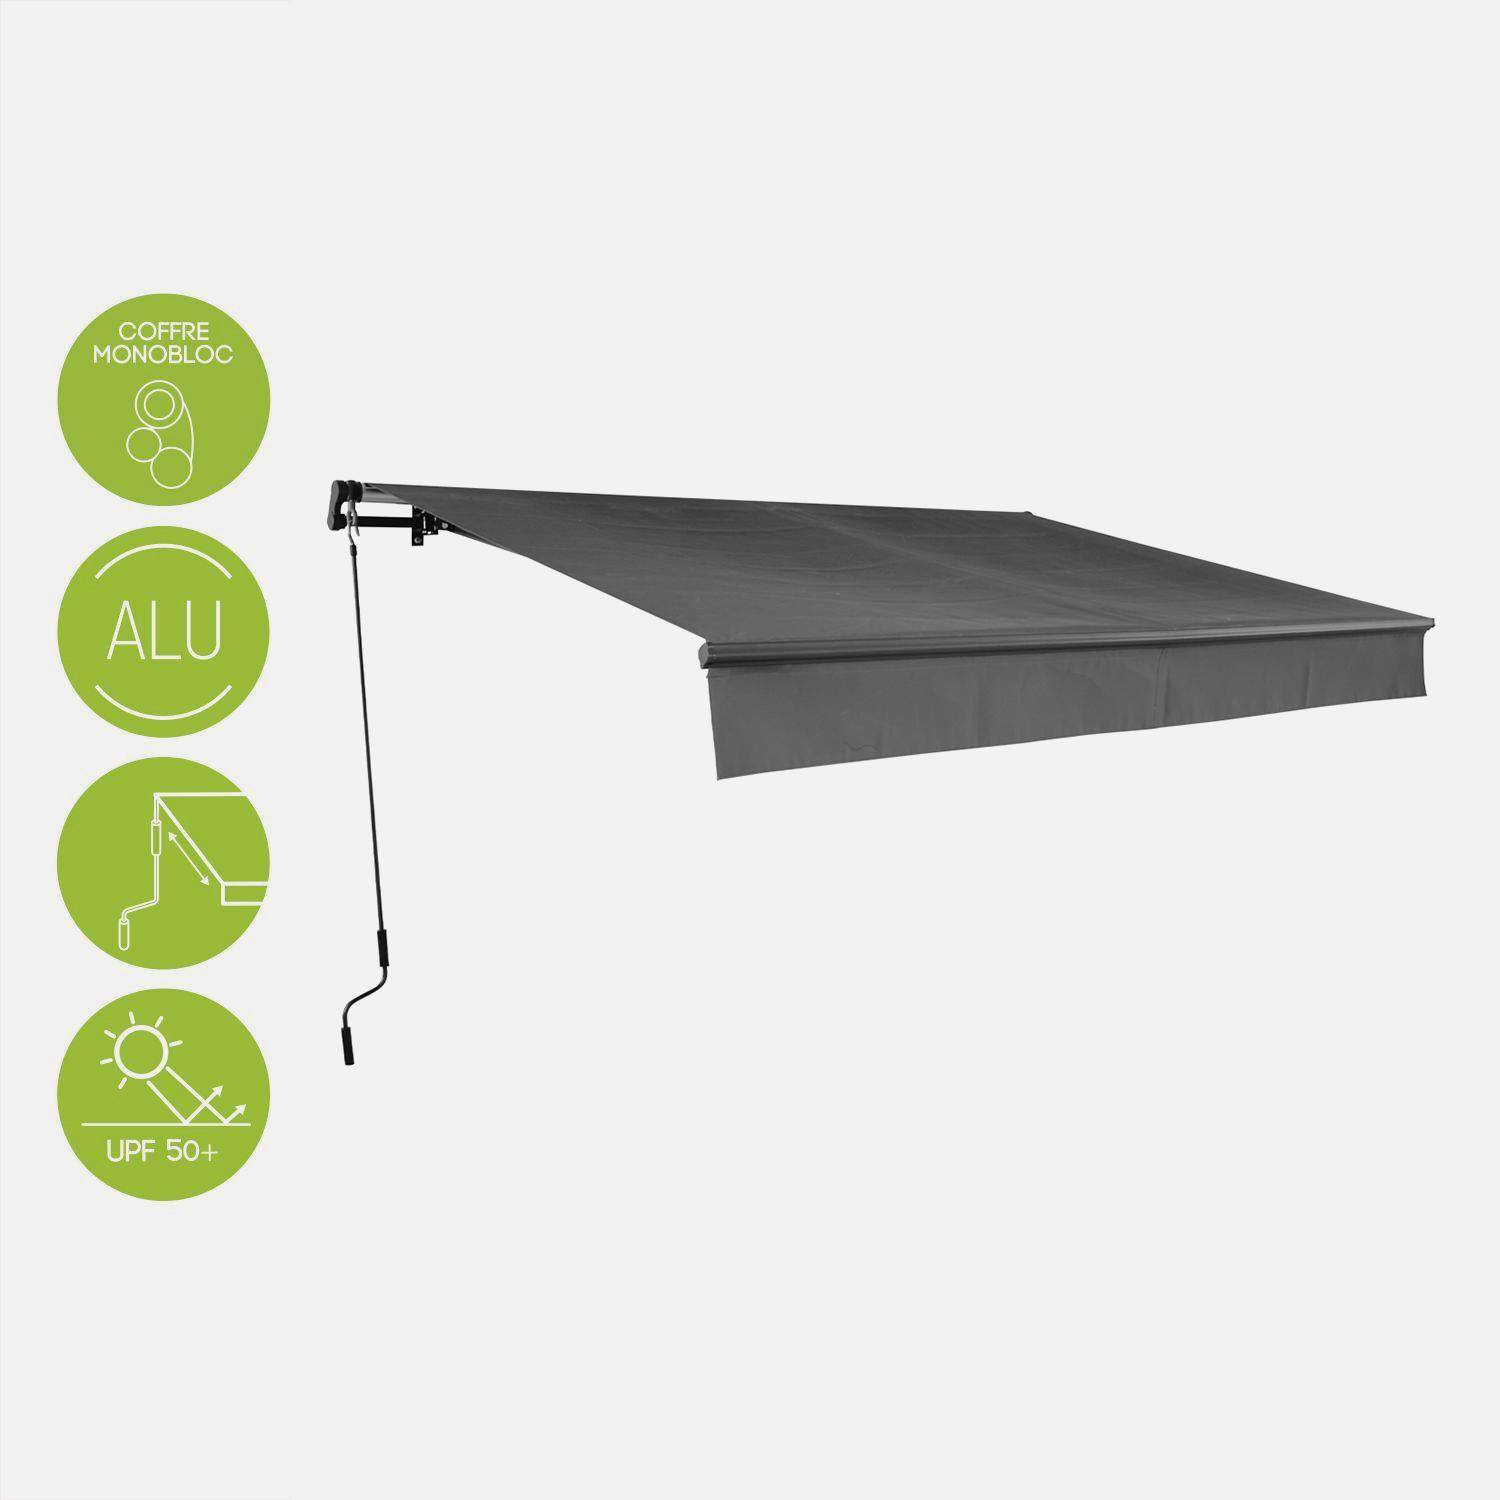 Retractable Patio Awning - wall awning, aluminium structure, manual system, coated polyester fabric - Alombra 3x2m - Grey Photo1